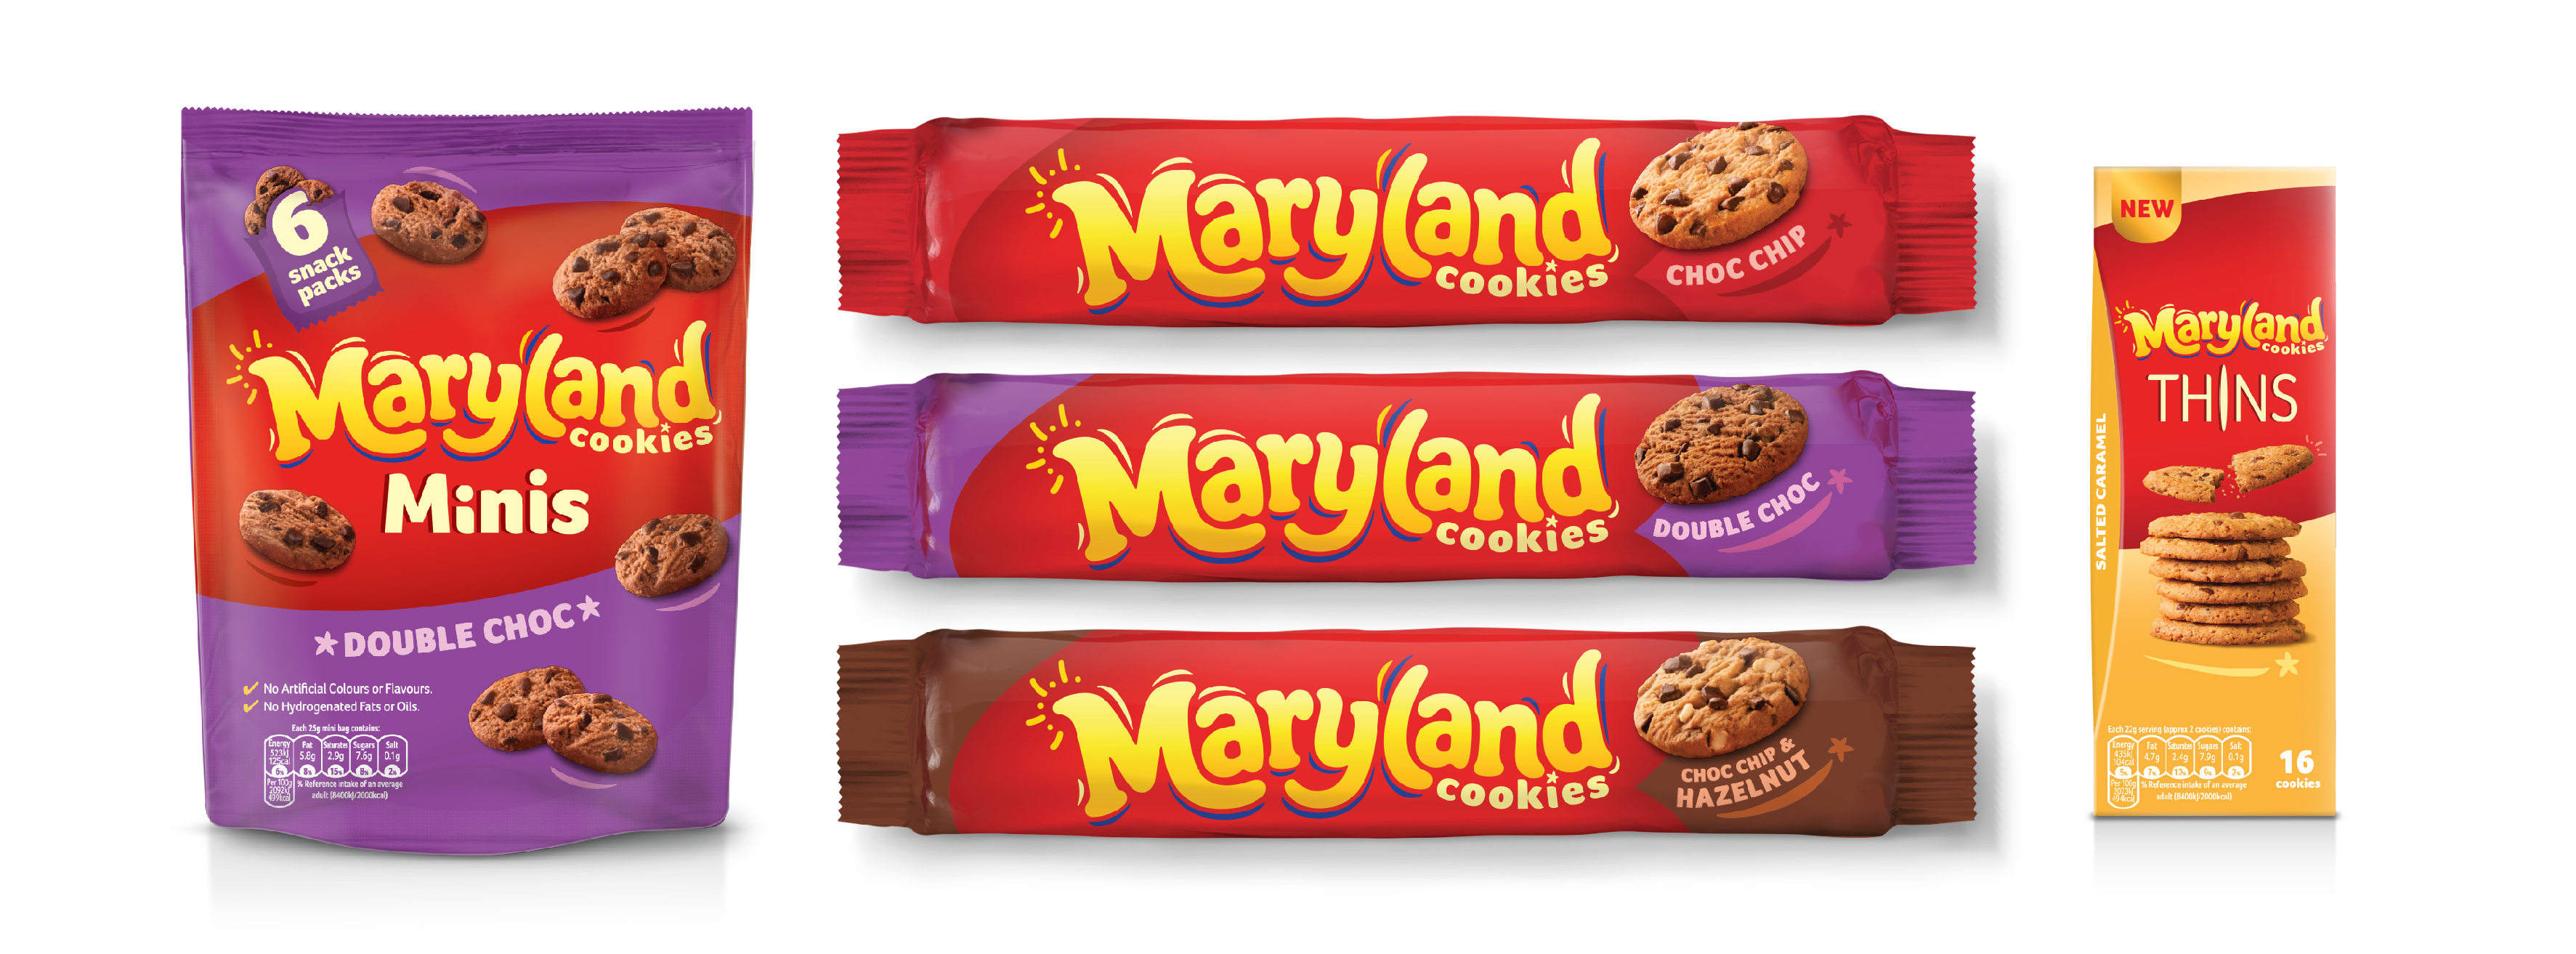 maryland biscuits